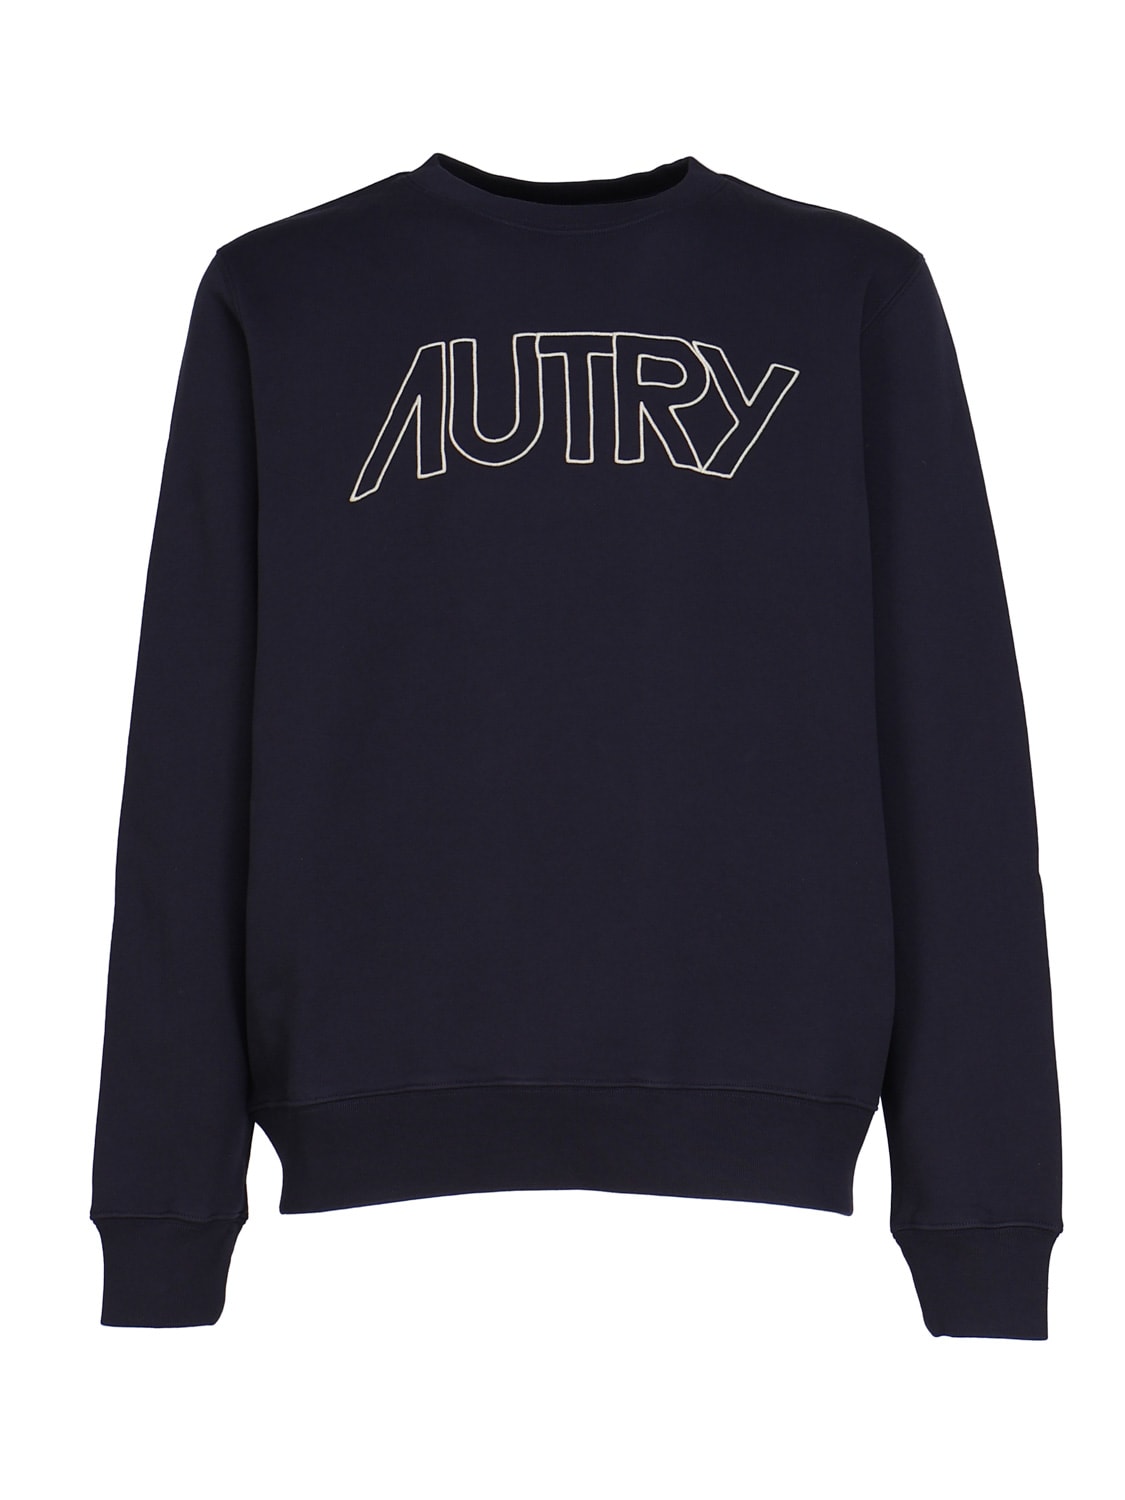 AUTRY SWEATSHIRT WITH EMBROIDERY